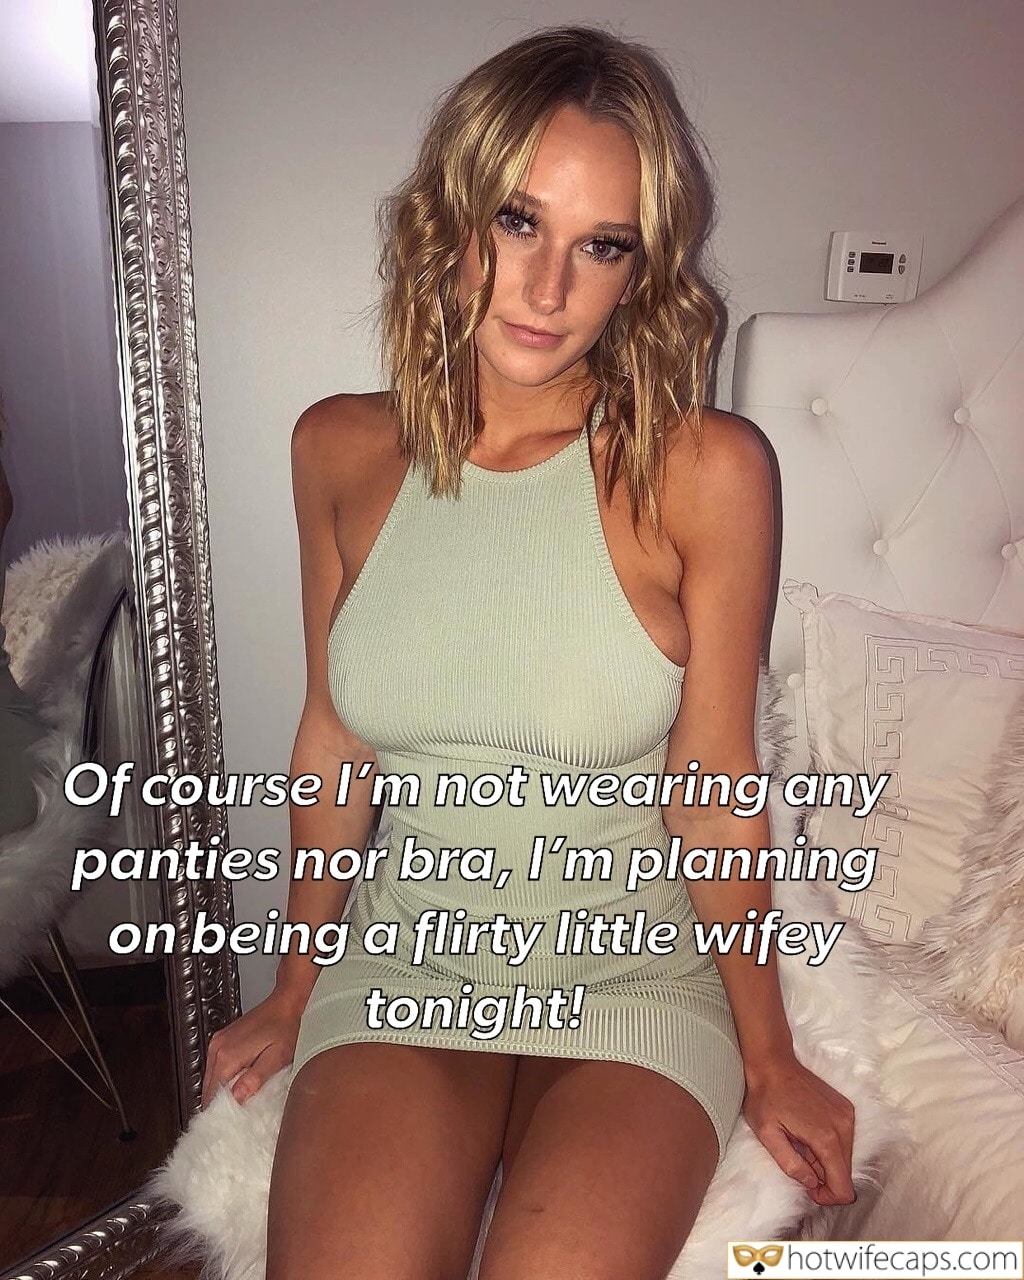 Wife Sharing Sexy Memes No Panties Cheating Bottomless hotwife caption: Of course I’m not wearing any panties nor bra, I’m planning on being a flirty little wifey tonight! blonde wife cheats on hot date with black guy Sexy Blonde in White